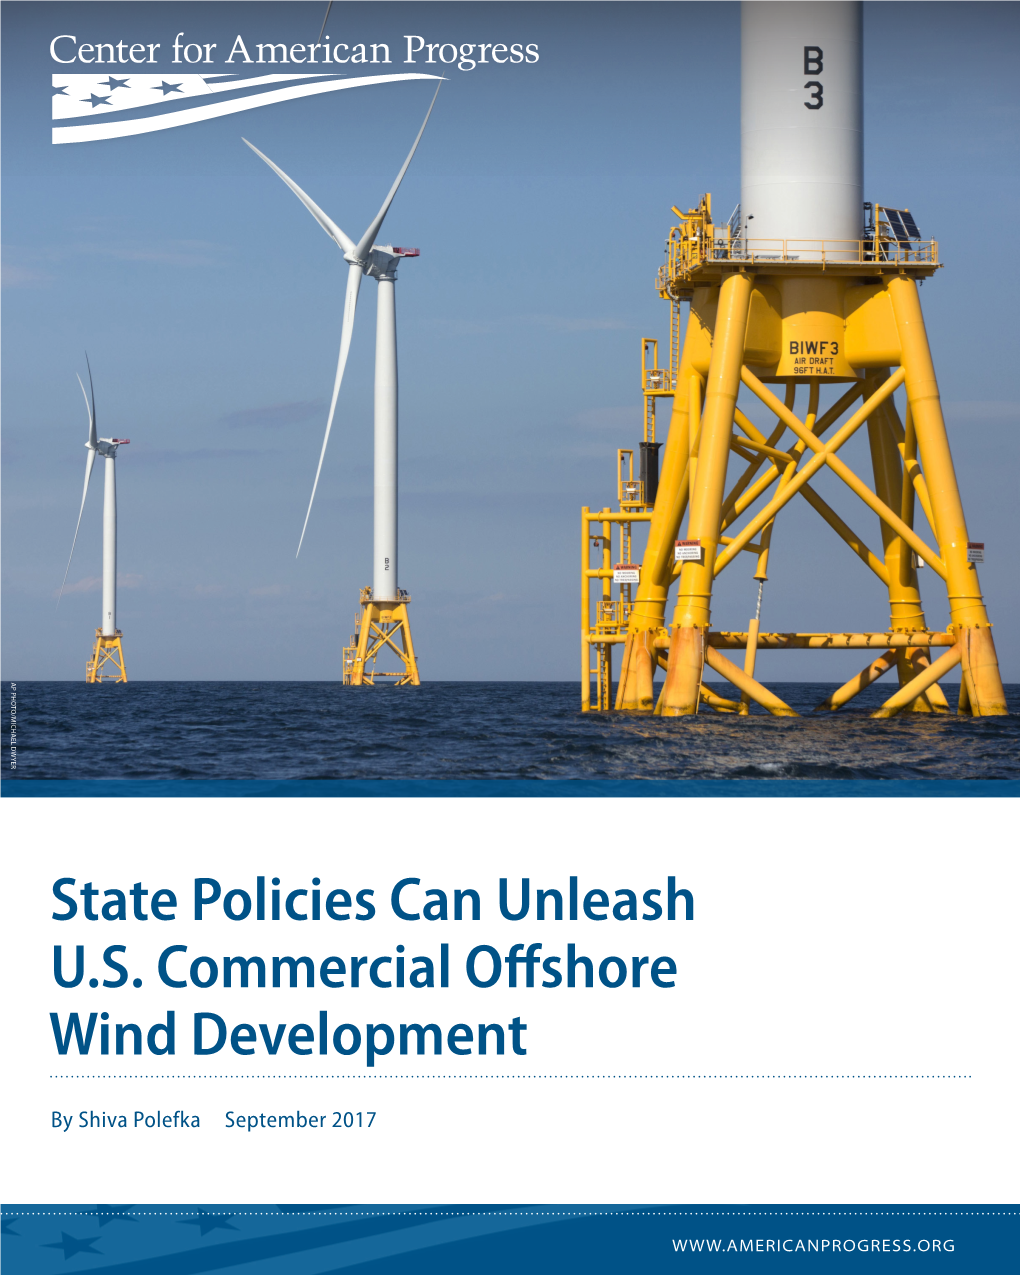 State Policies Can Unleash U.S. Commercial Offshore Wind Development